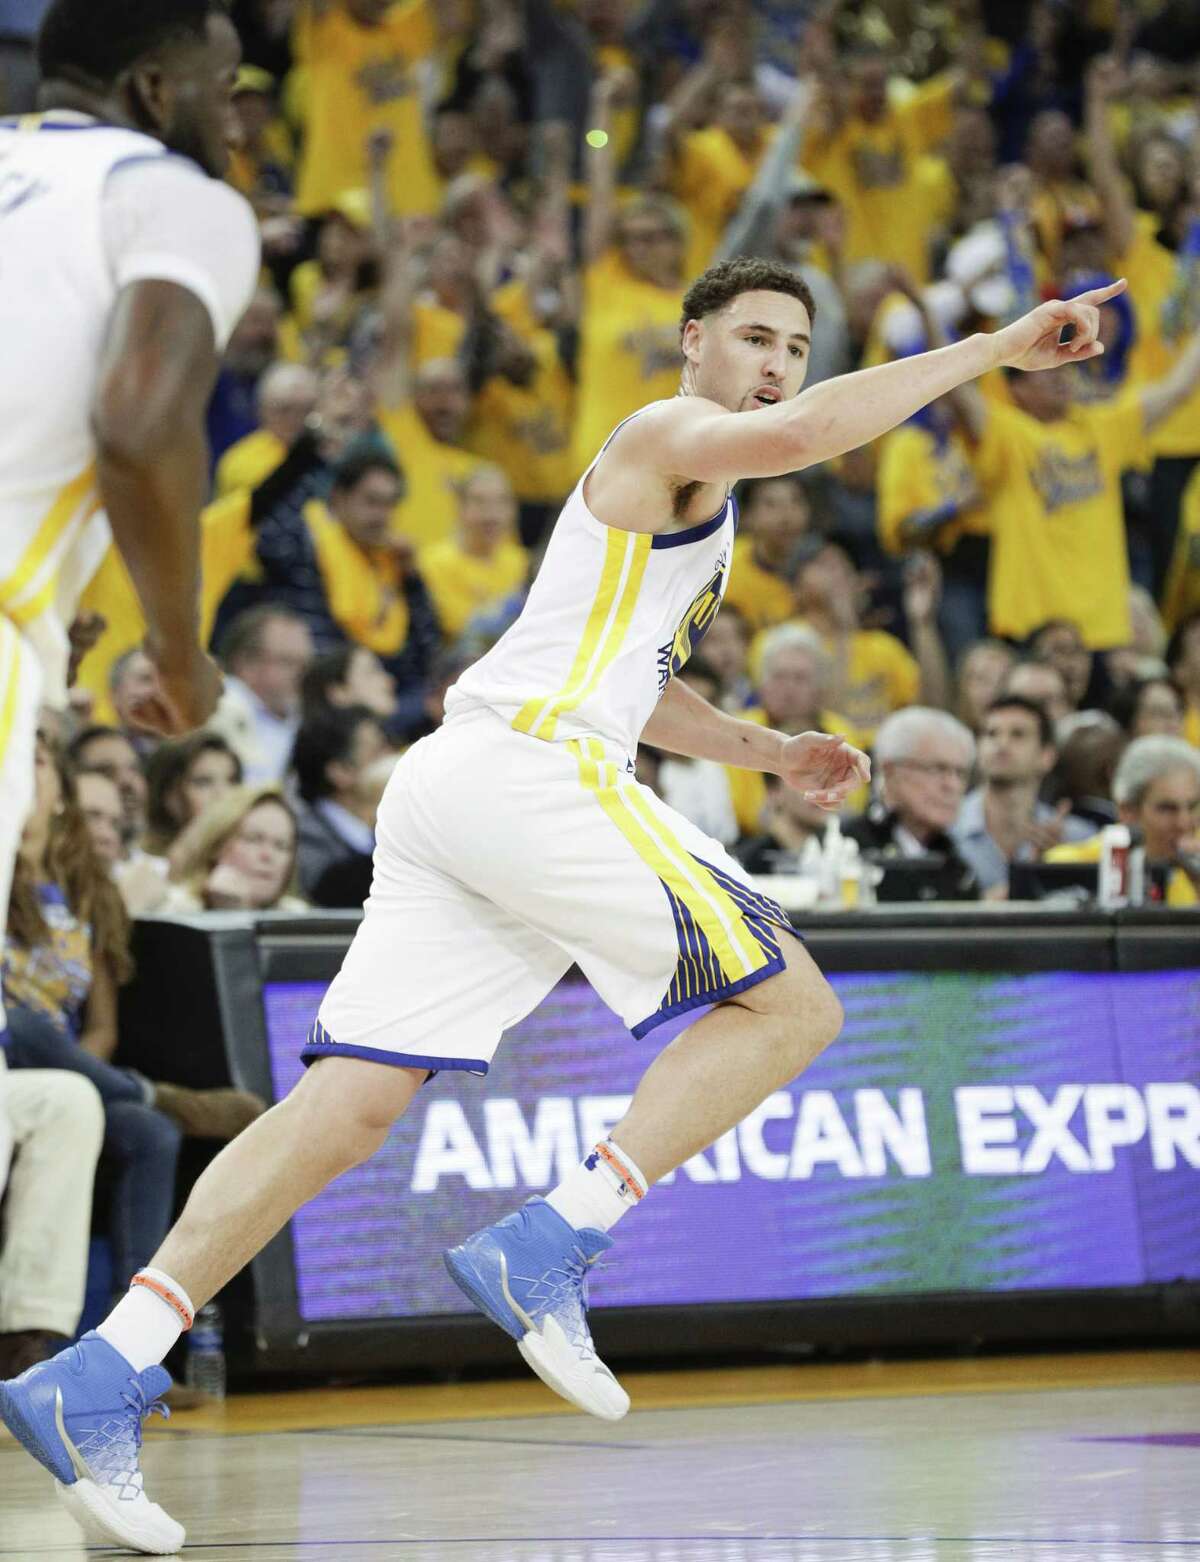 Golden State Warriors' Klay Thompson reacts after hitting a three-pointer in the second quarter during game 1 of round 2 of the Western Conference Finals between the Golden State Warriors and the New Orleans Pelicans at Oracle Arena on Saturday, April 28, 2018 in Oakland, Calif.